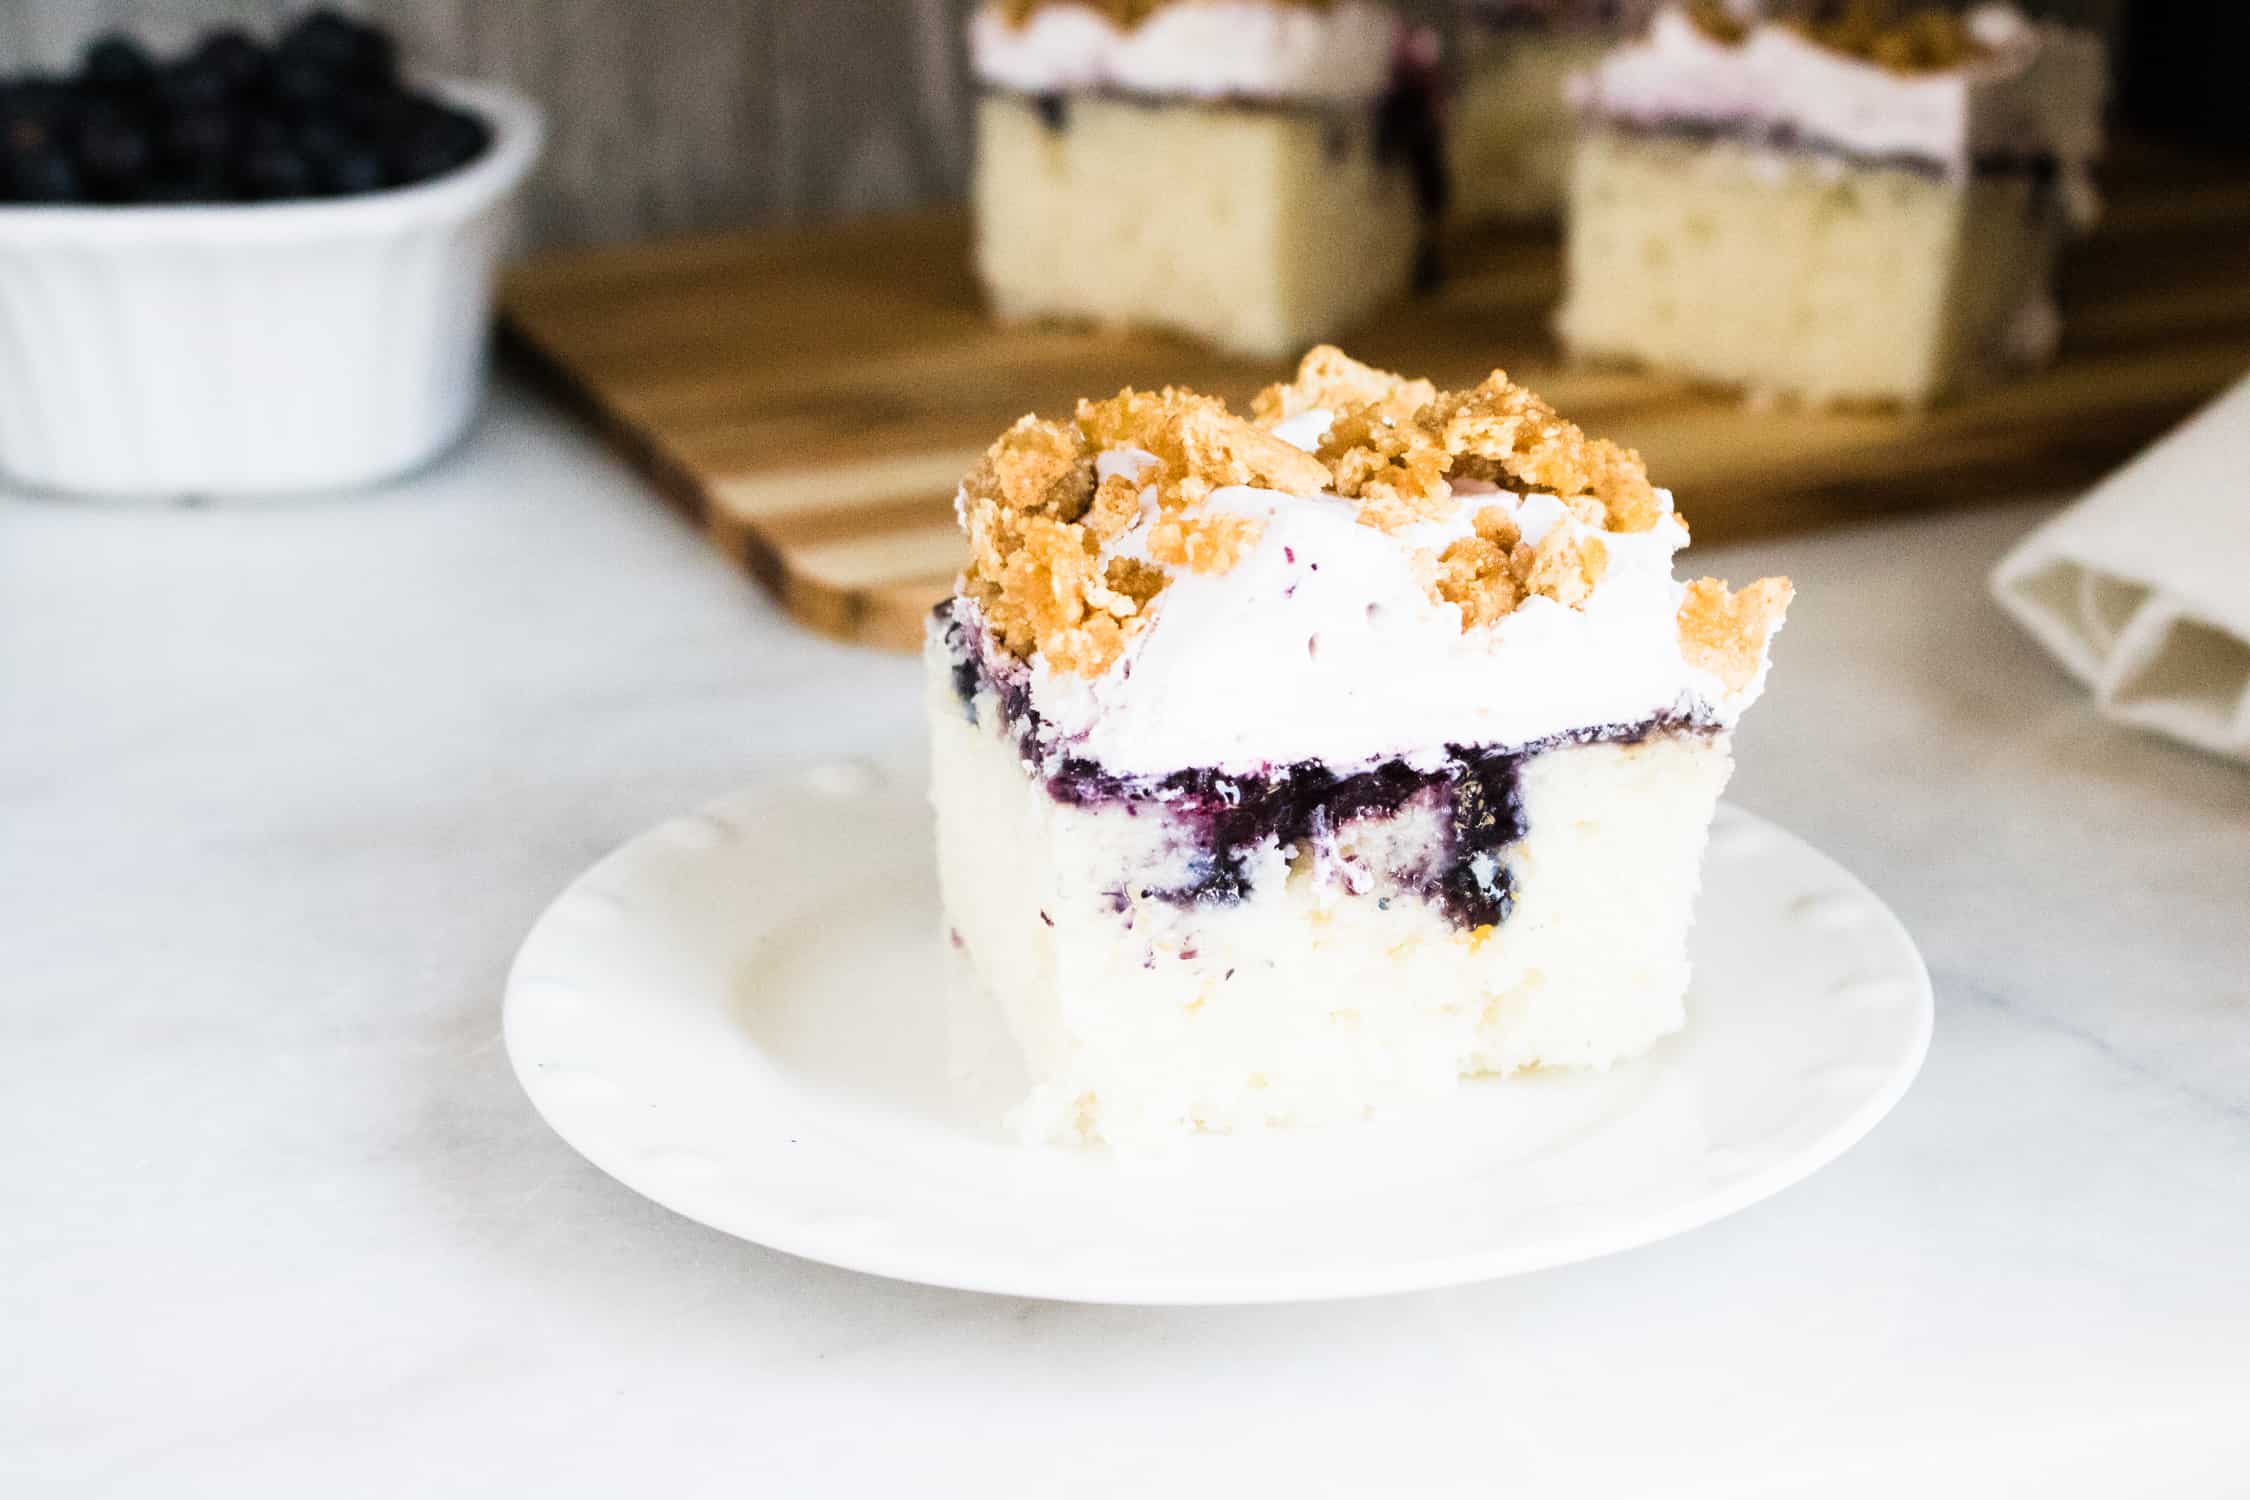 one slice of blueberry buckle poke cake served on a white dessert plate sitting in front of two slices on a wooden cutting board next to a bowl of blueberries